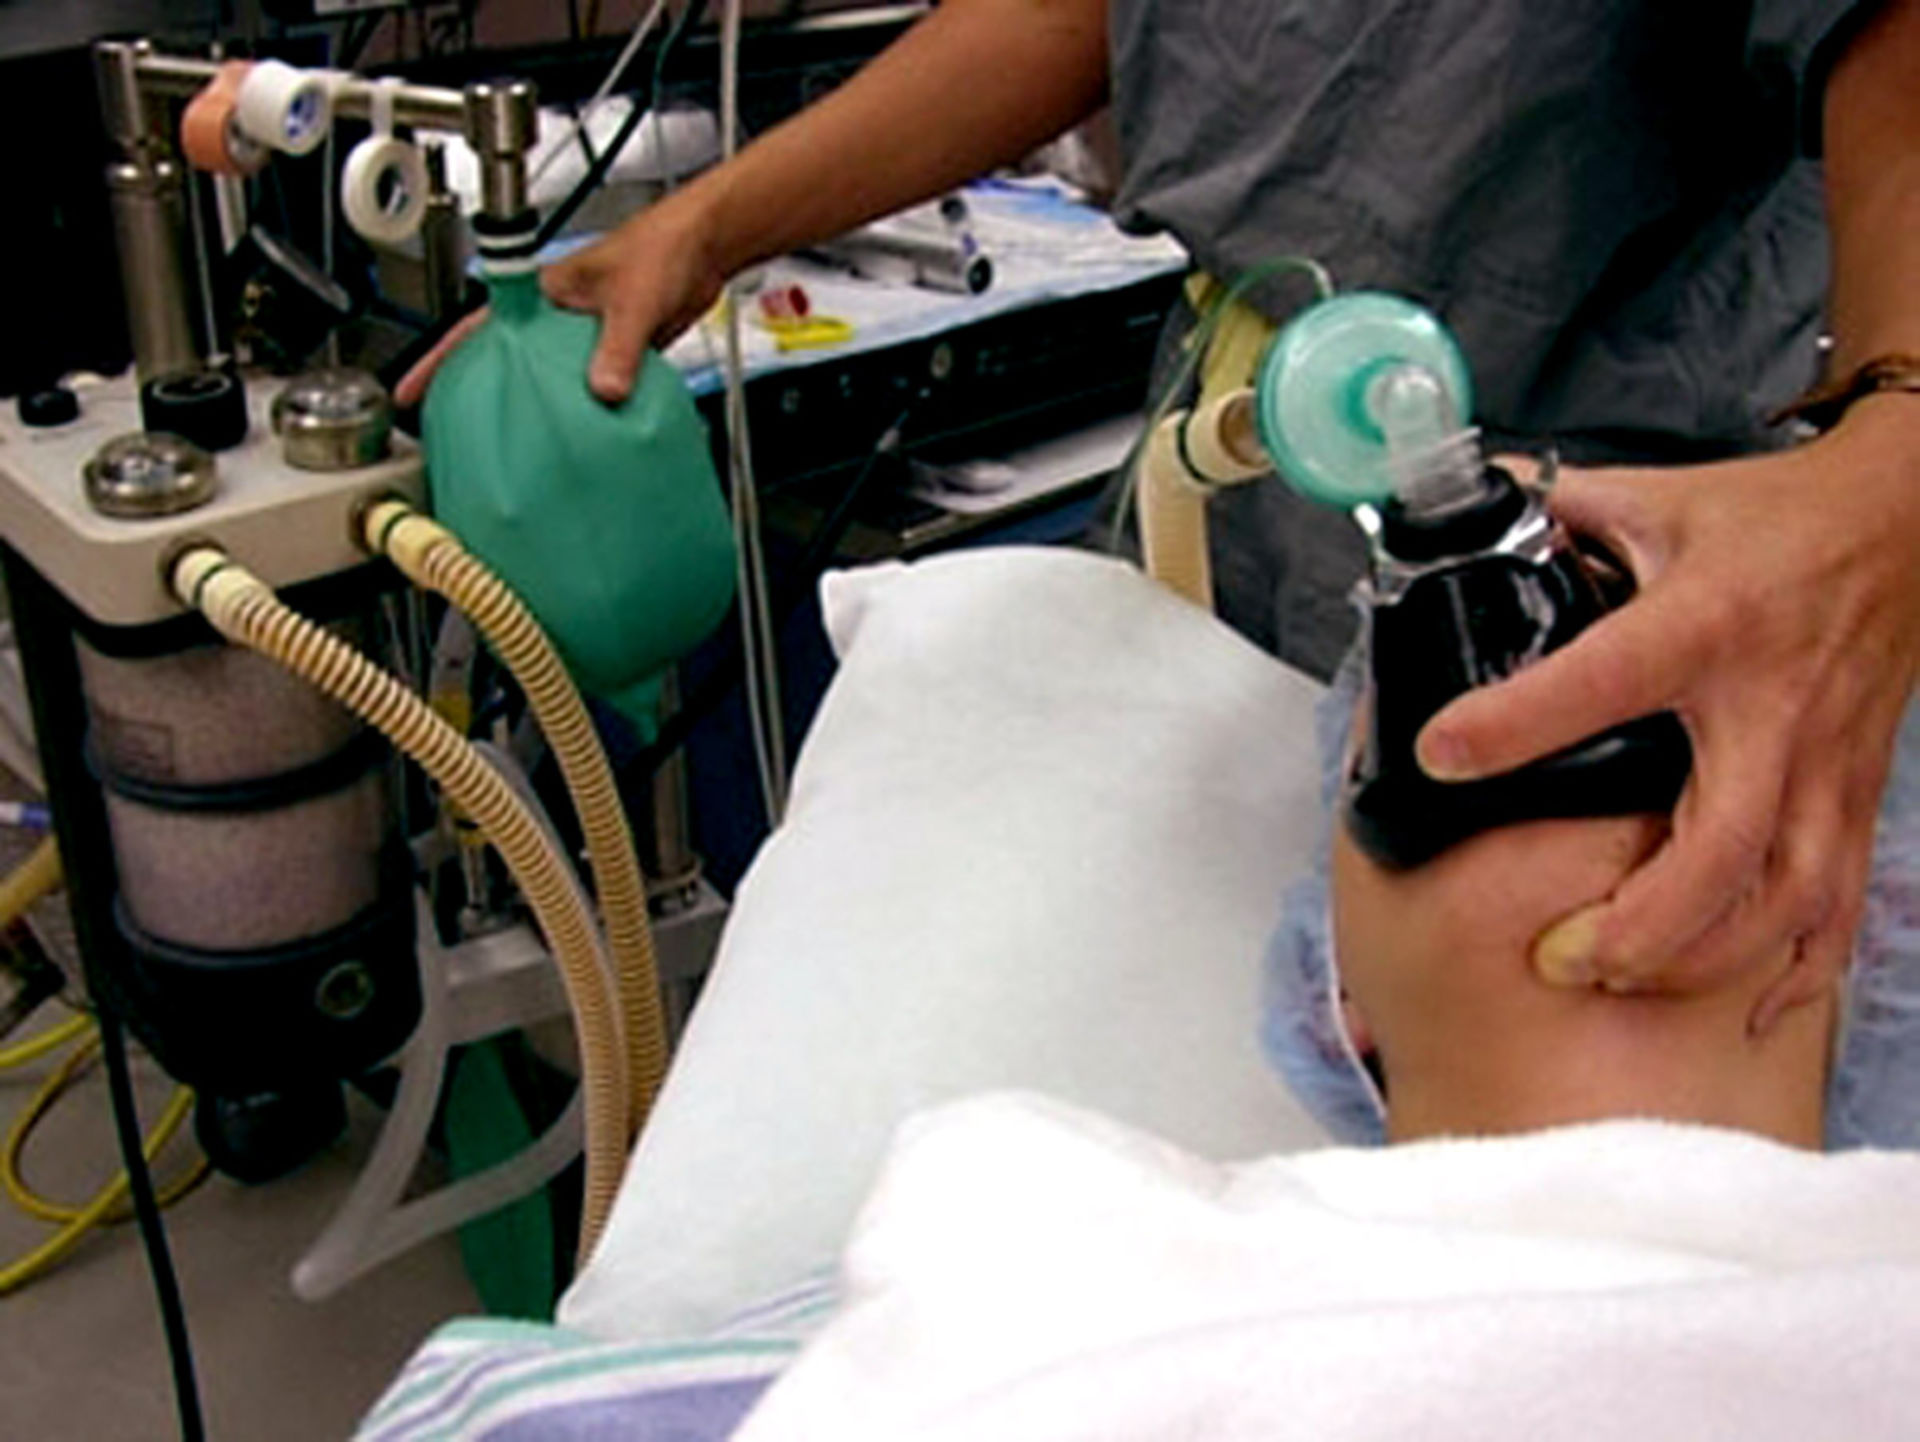 Bag valve mask ventilation in anesthesia induction